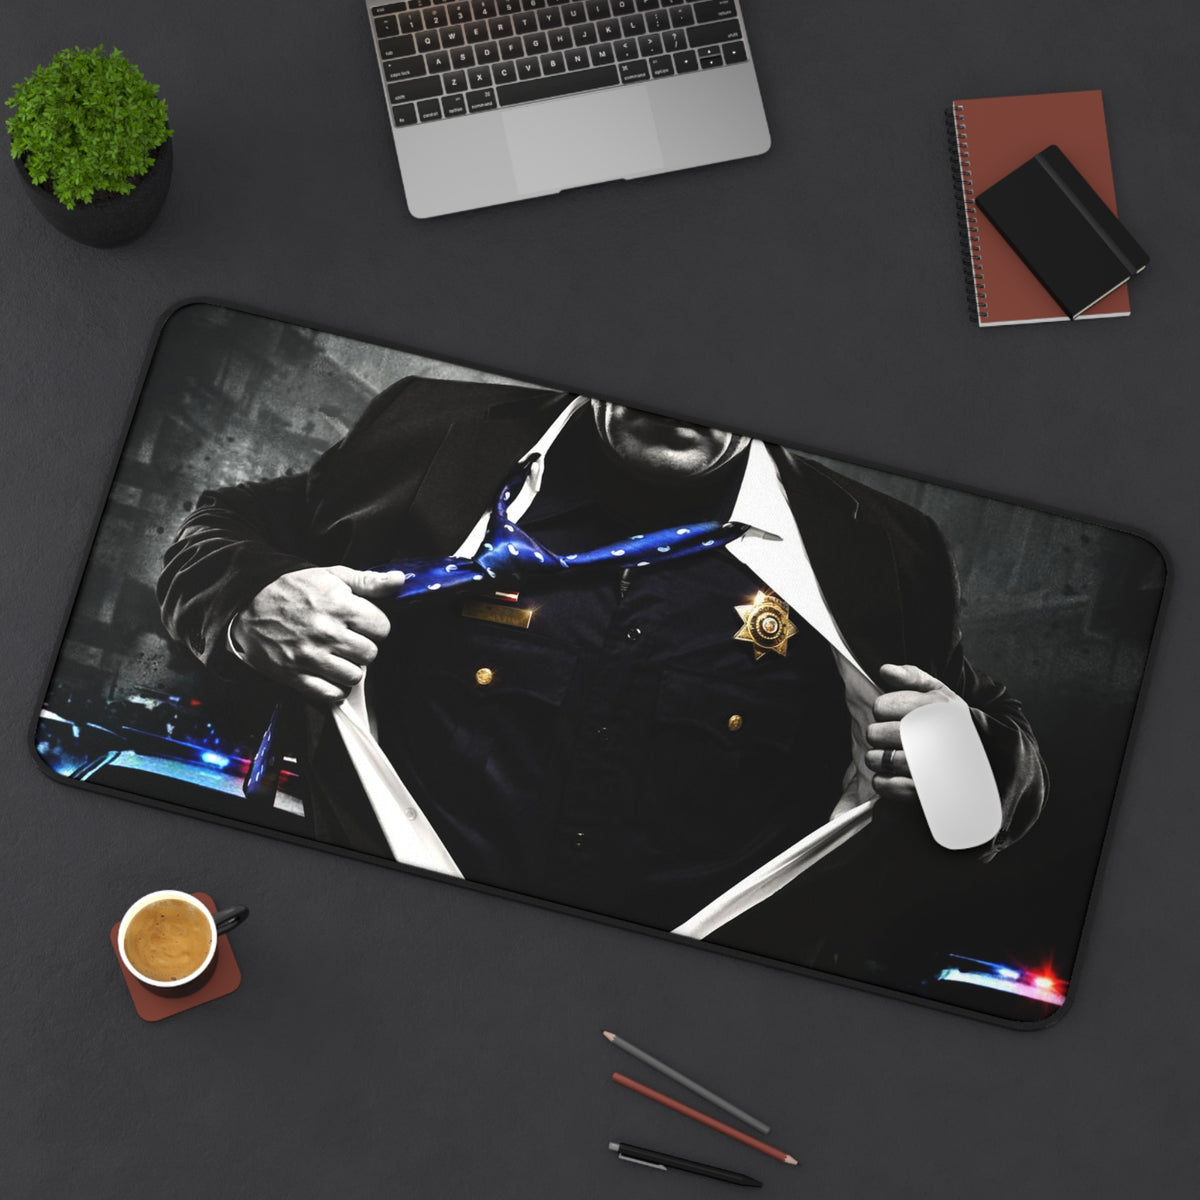 Answering the Call Police Desk Mat